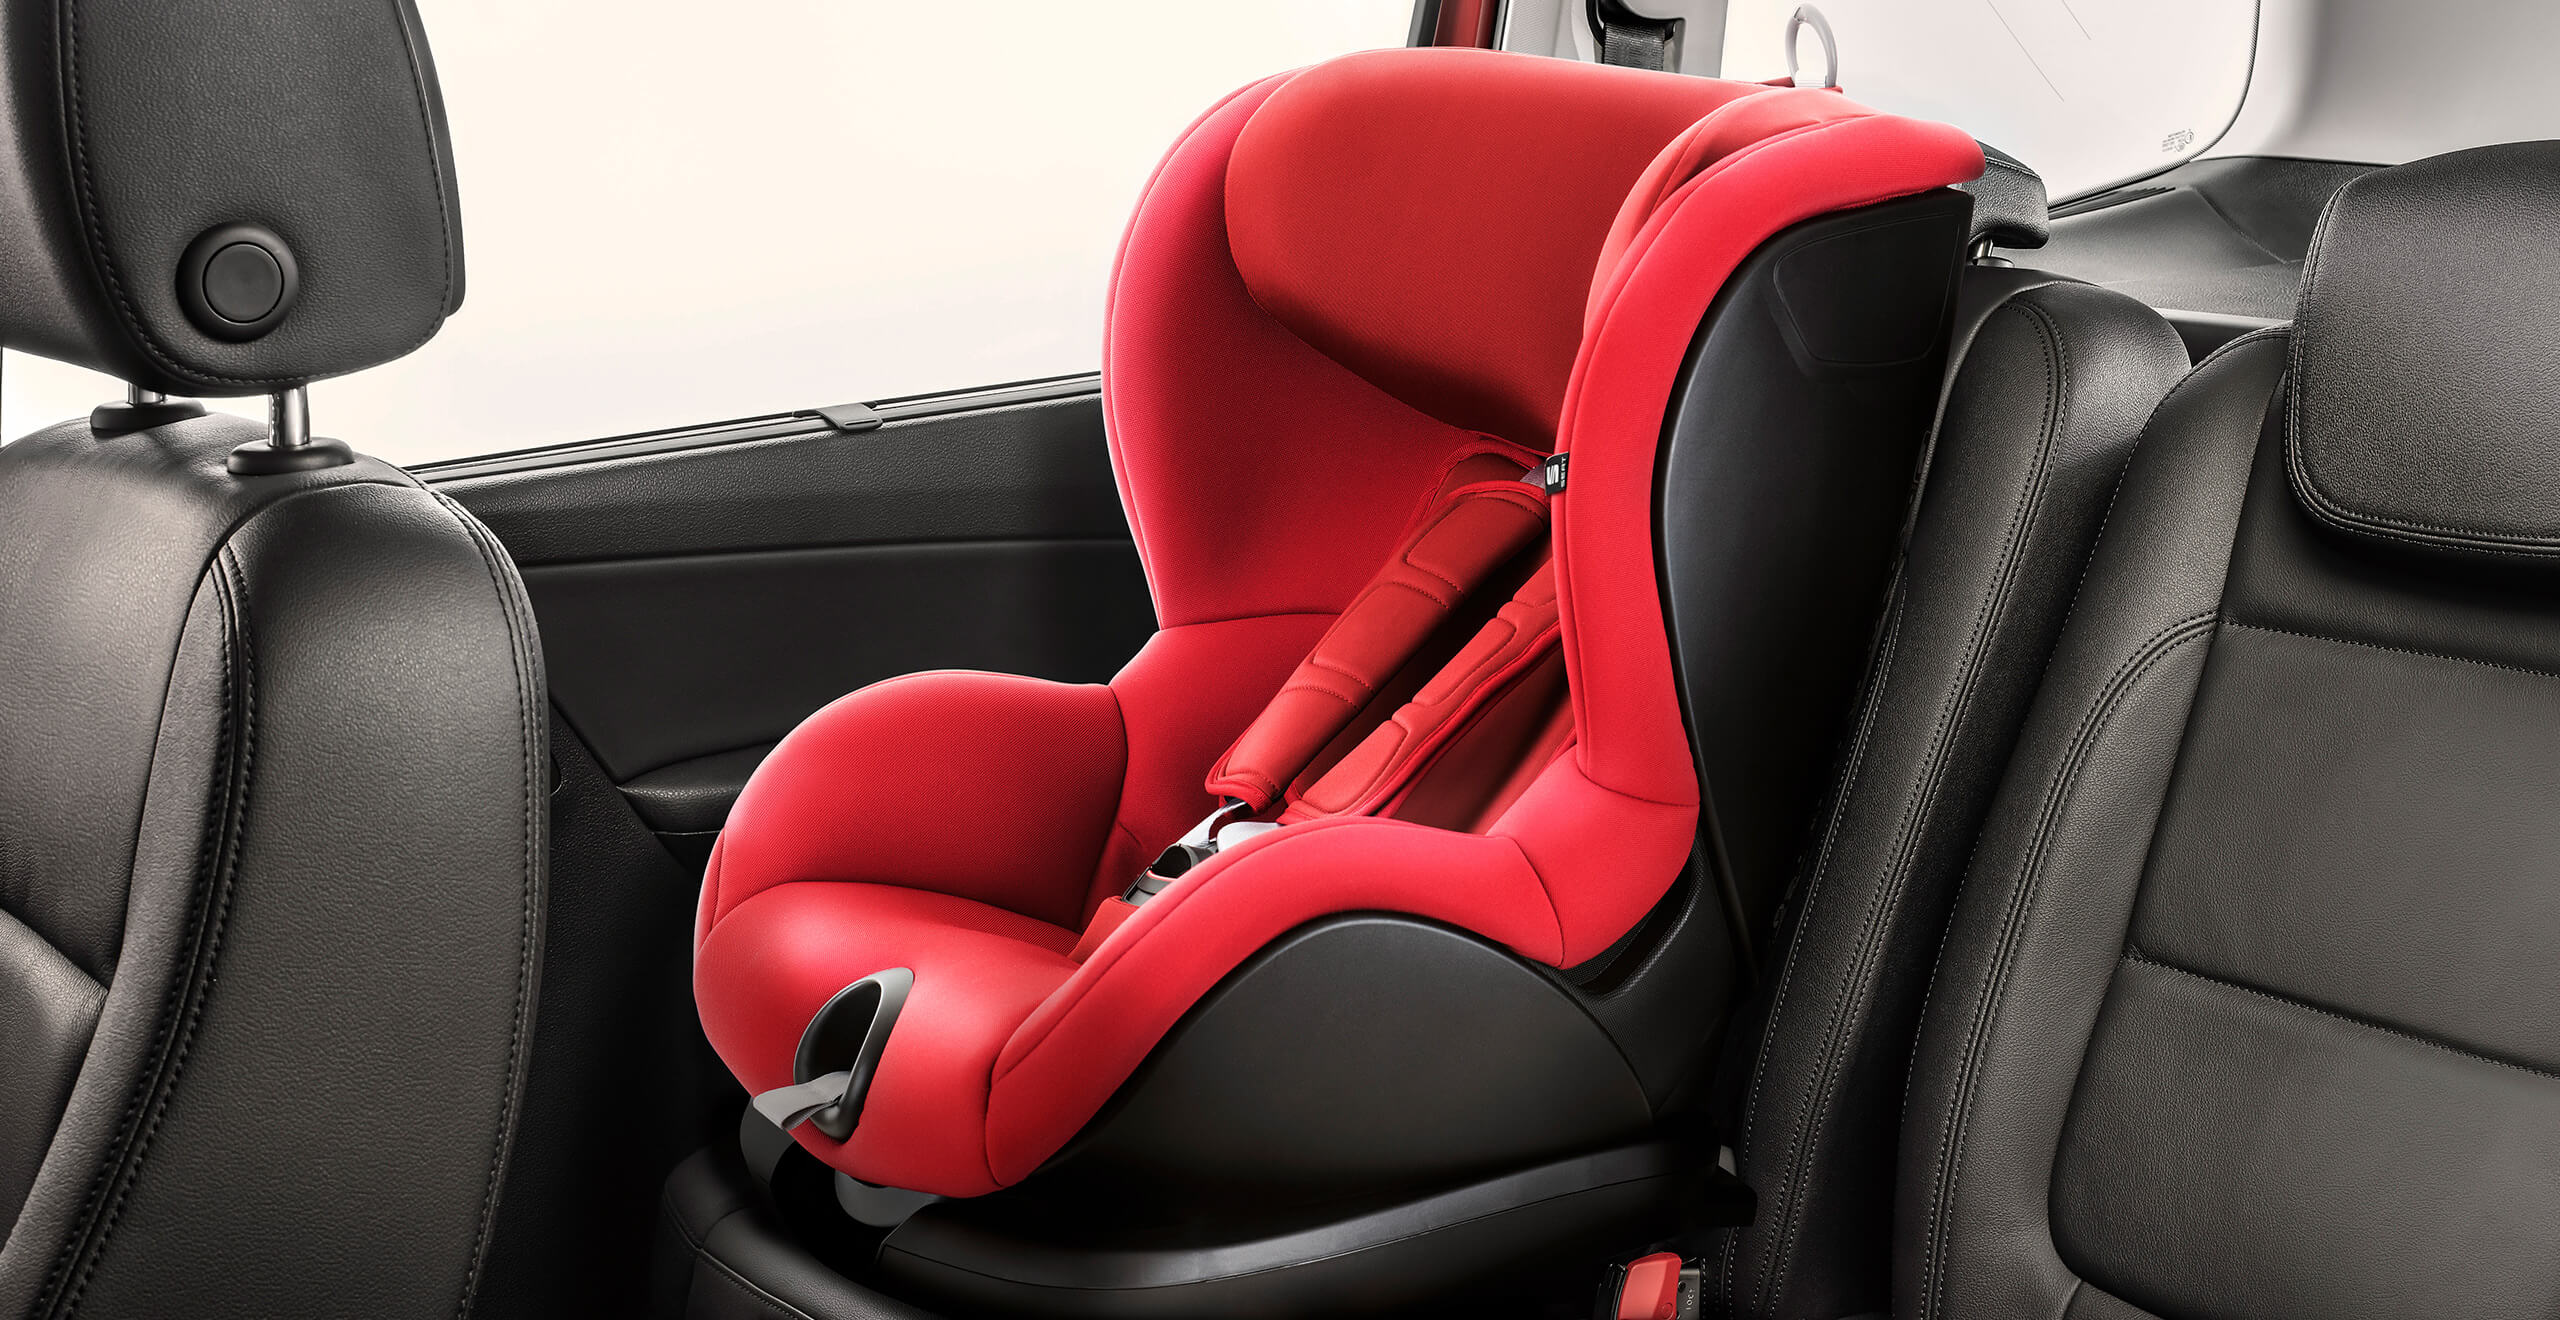 SEAT Alhambra car with ISOFIX, Child safety seat that tethers to the chassis. 